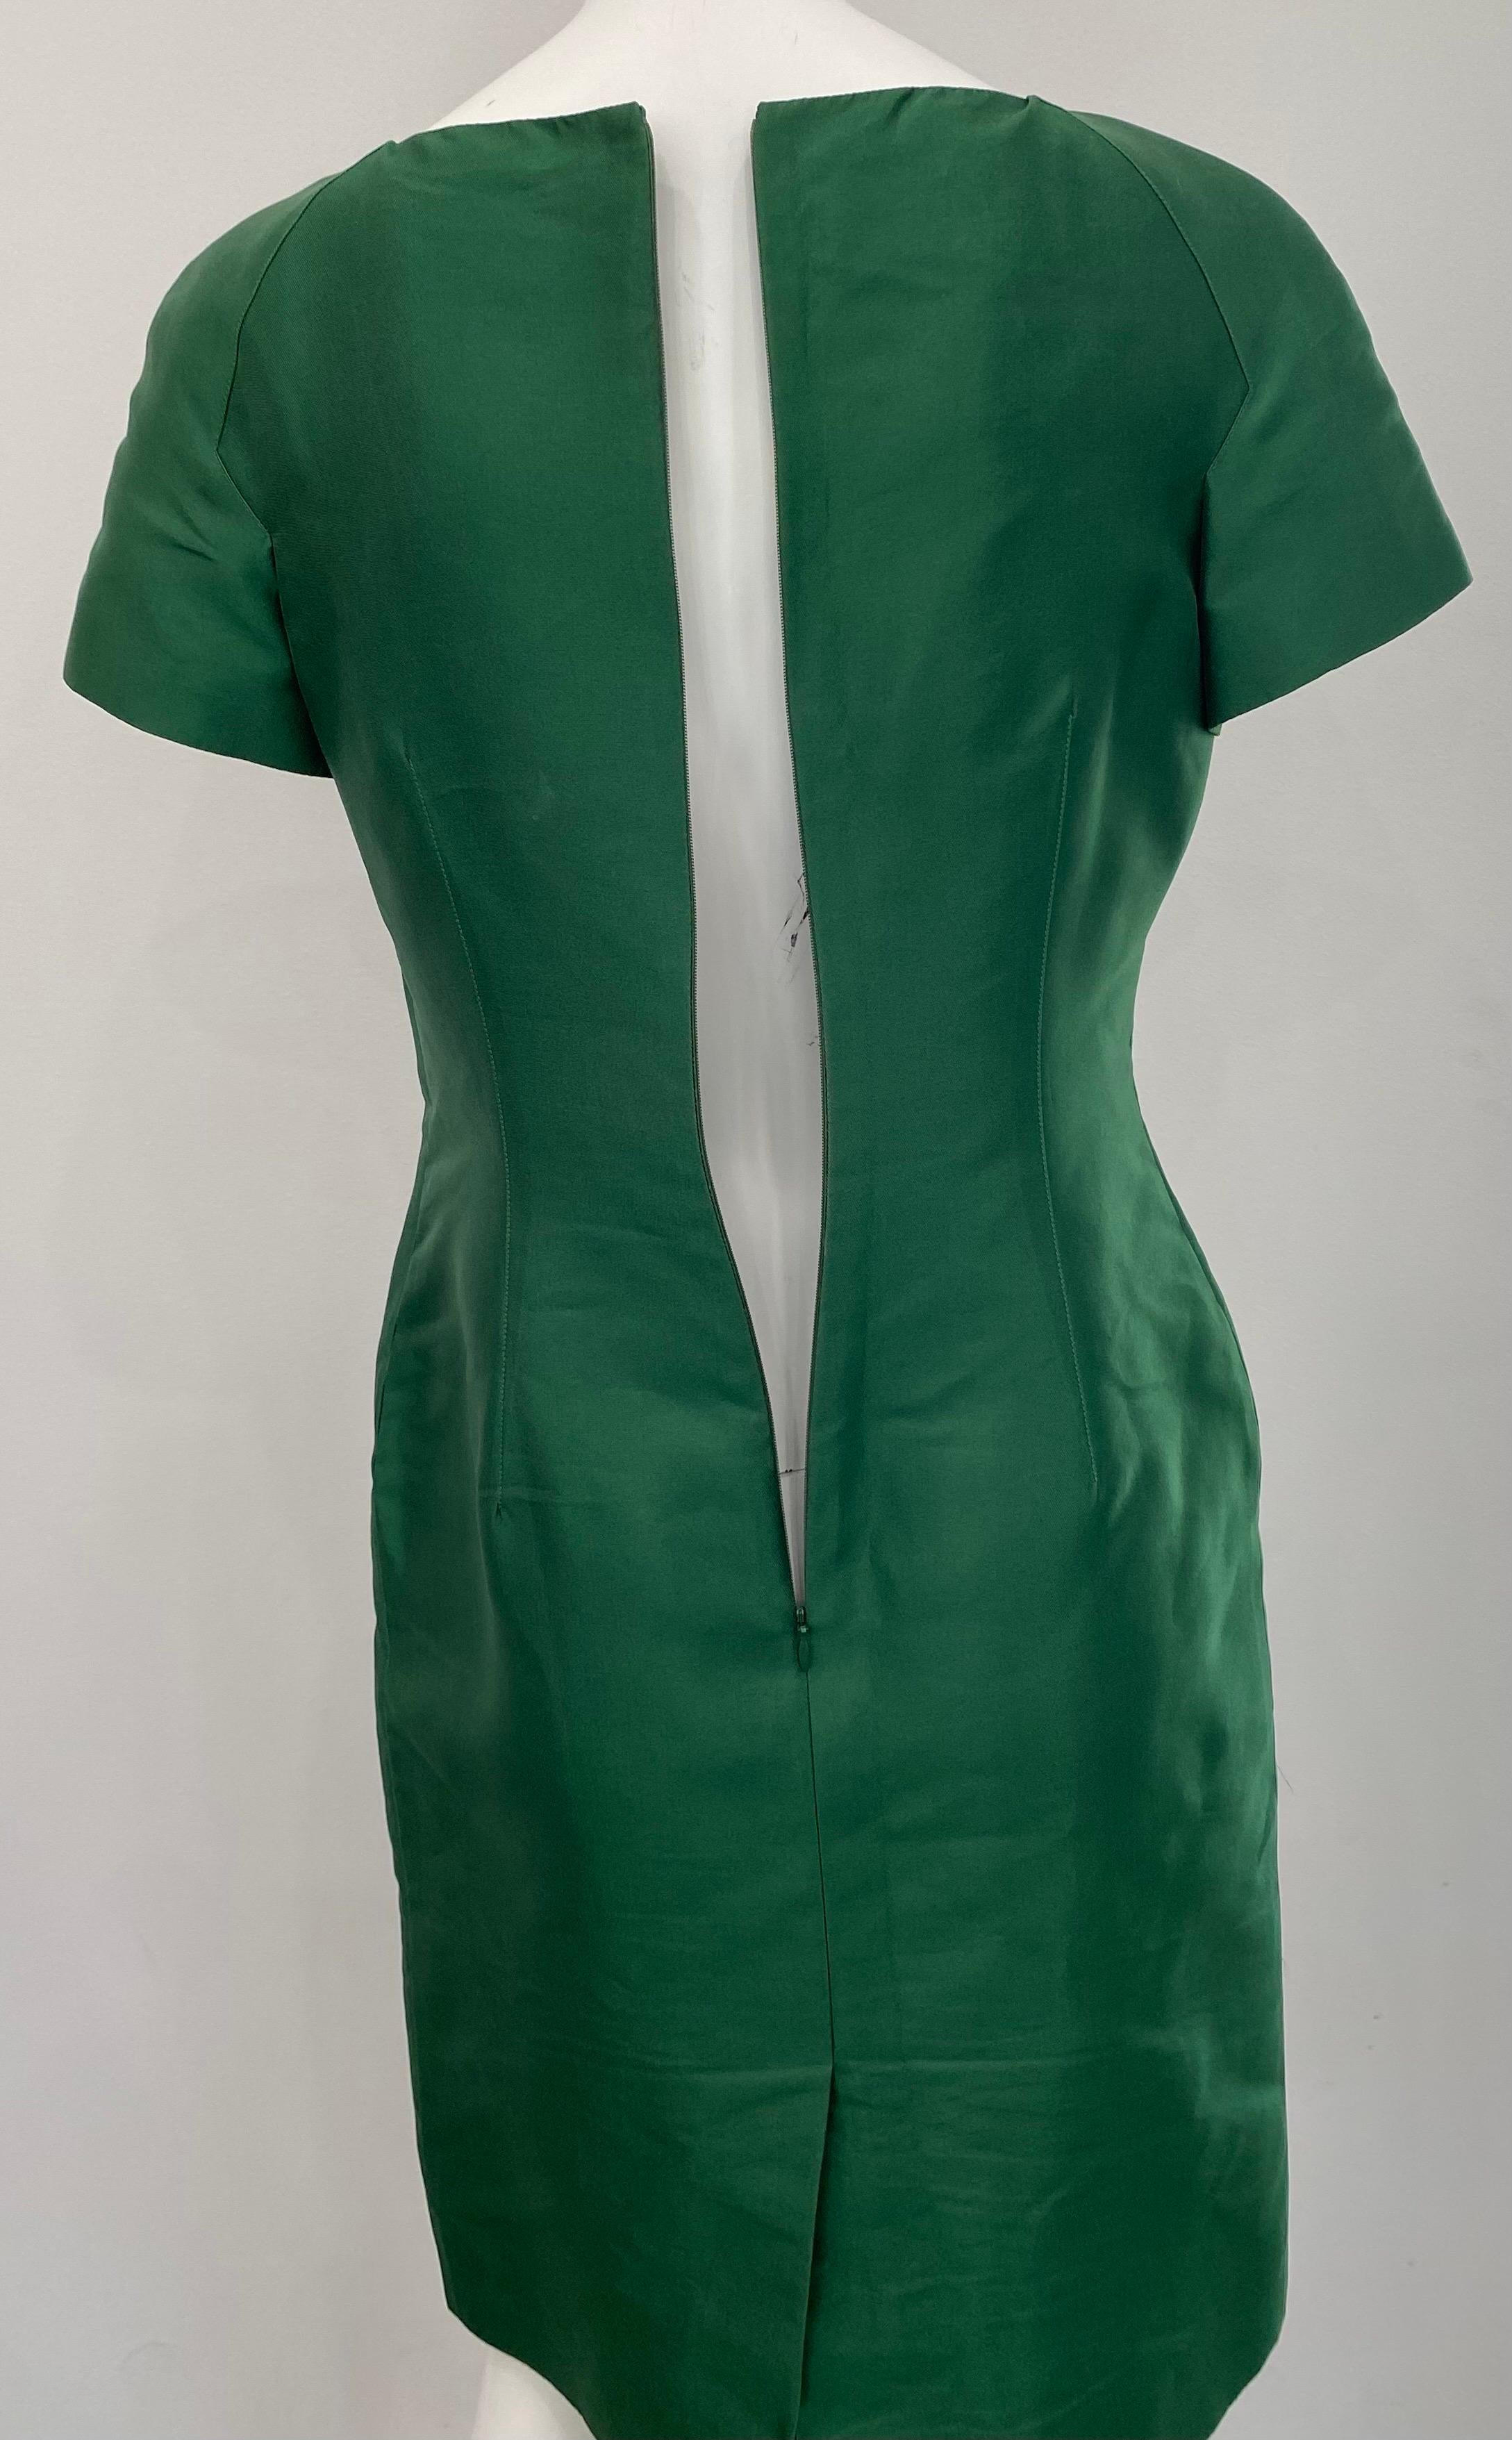 Valentino Emerald Green Silk and Lace Cap Sleeve Sheath Dress - Sz 8 For Sale 1